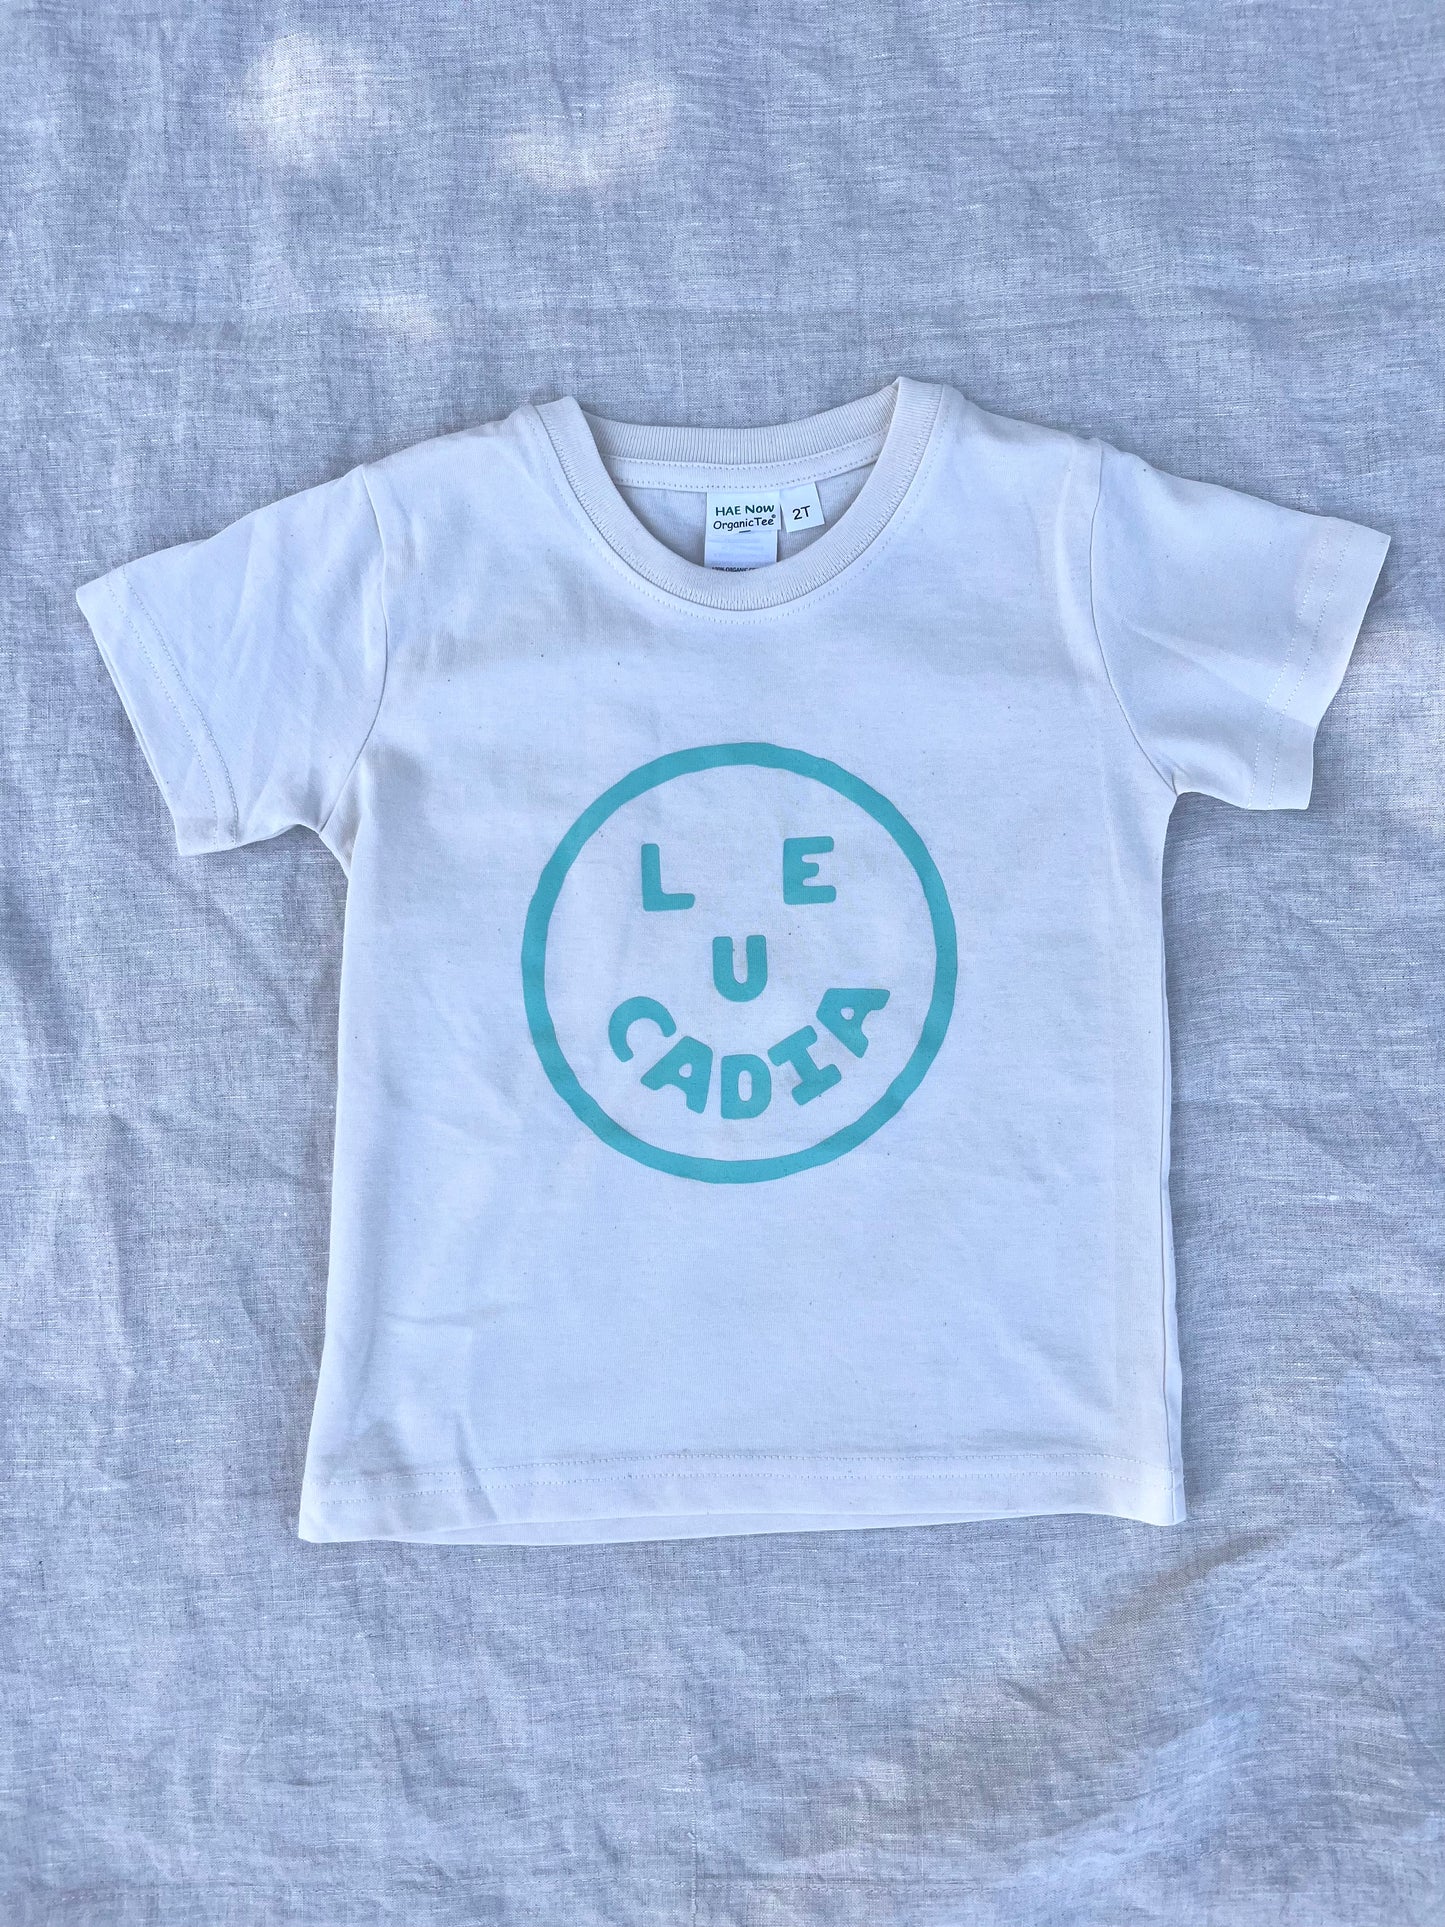 A fun little organic kids tee with a super cute little Leucadia smiley face by local artist Zach Smith. Printed on an organic cotton, fair trade tee with all proceeds to San Diego area families facing housing insecurity. Keep it funky, keep it kind, keep it local.